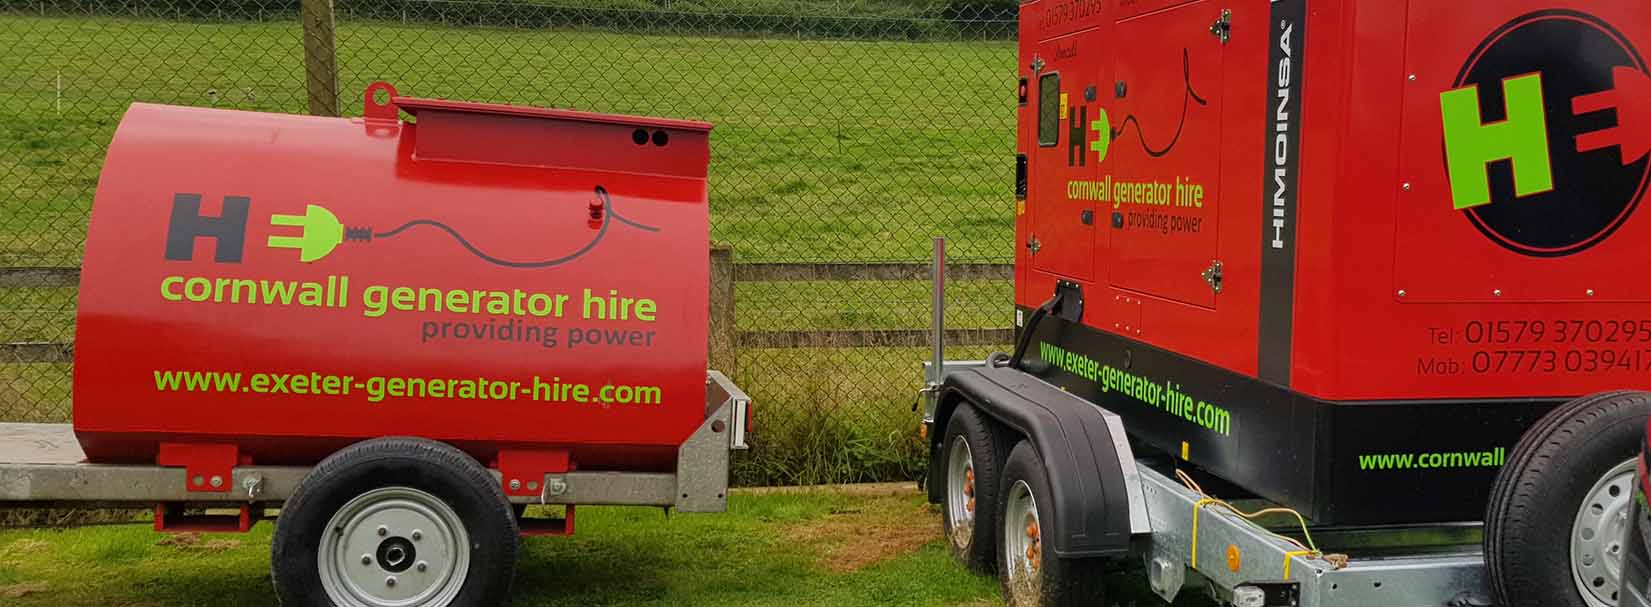 Exeter generator and fuel bowser for hire